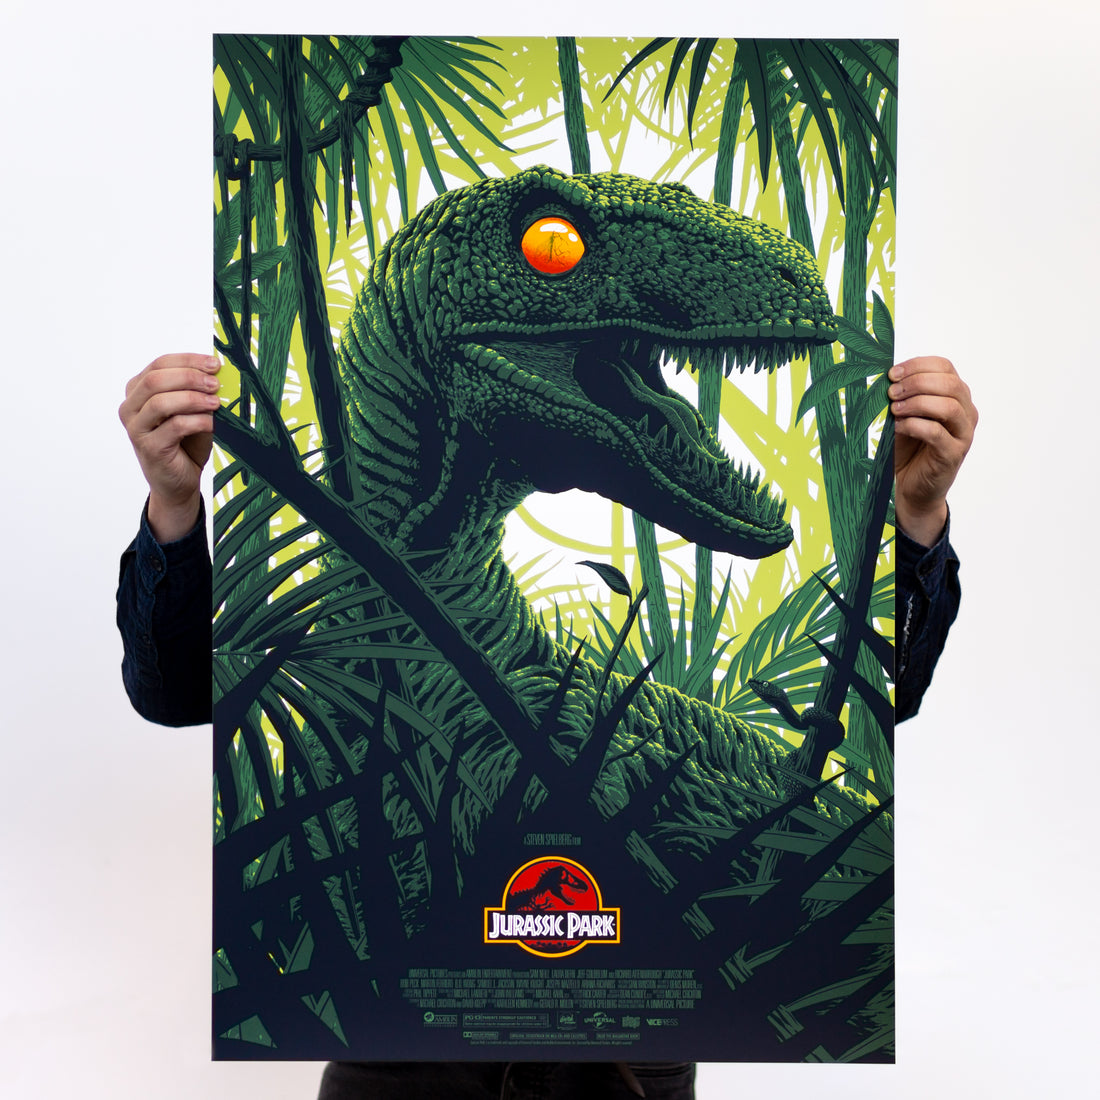 Jurassic Park Editions Movie Poster by Florey – Vice Press